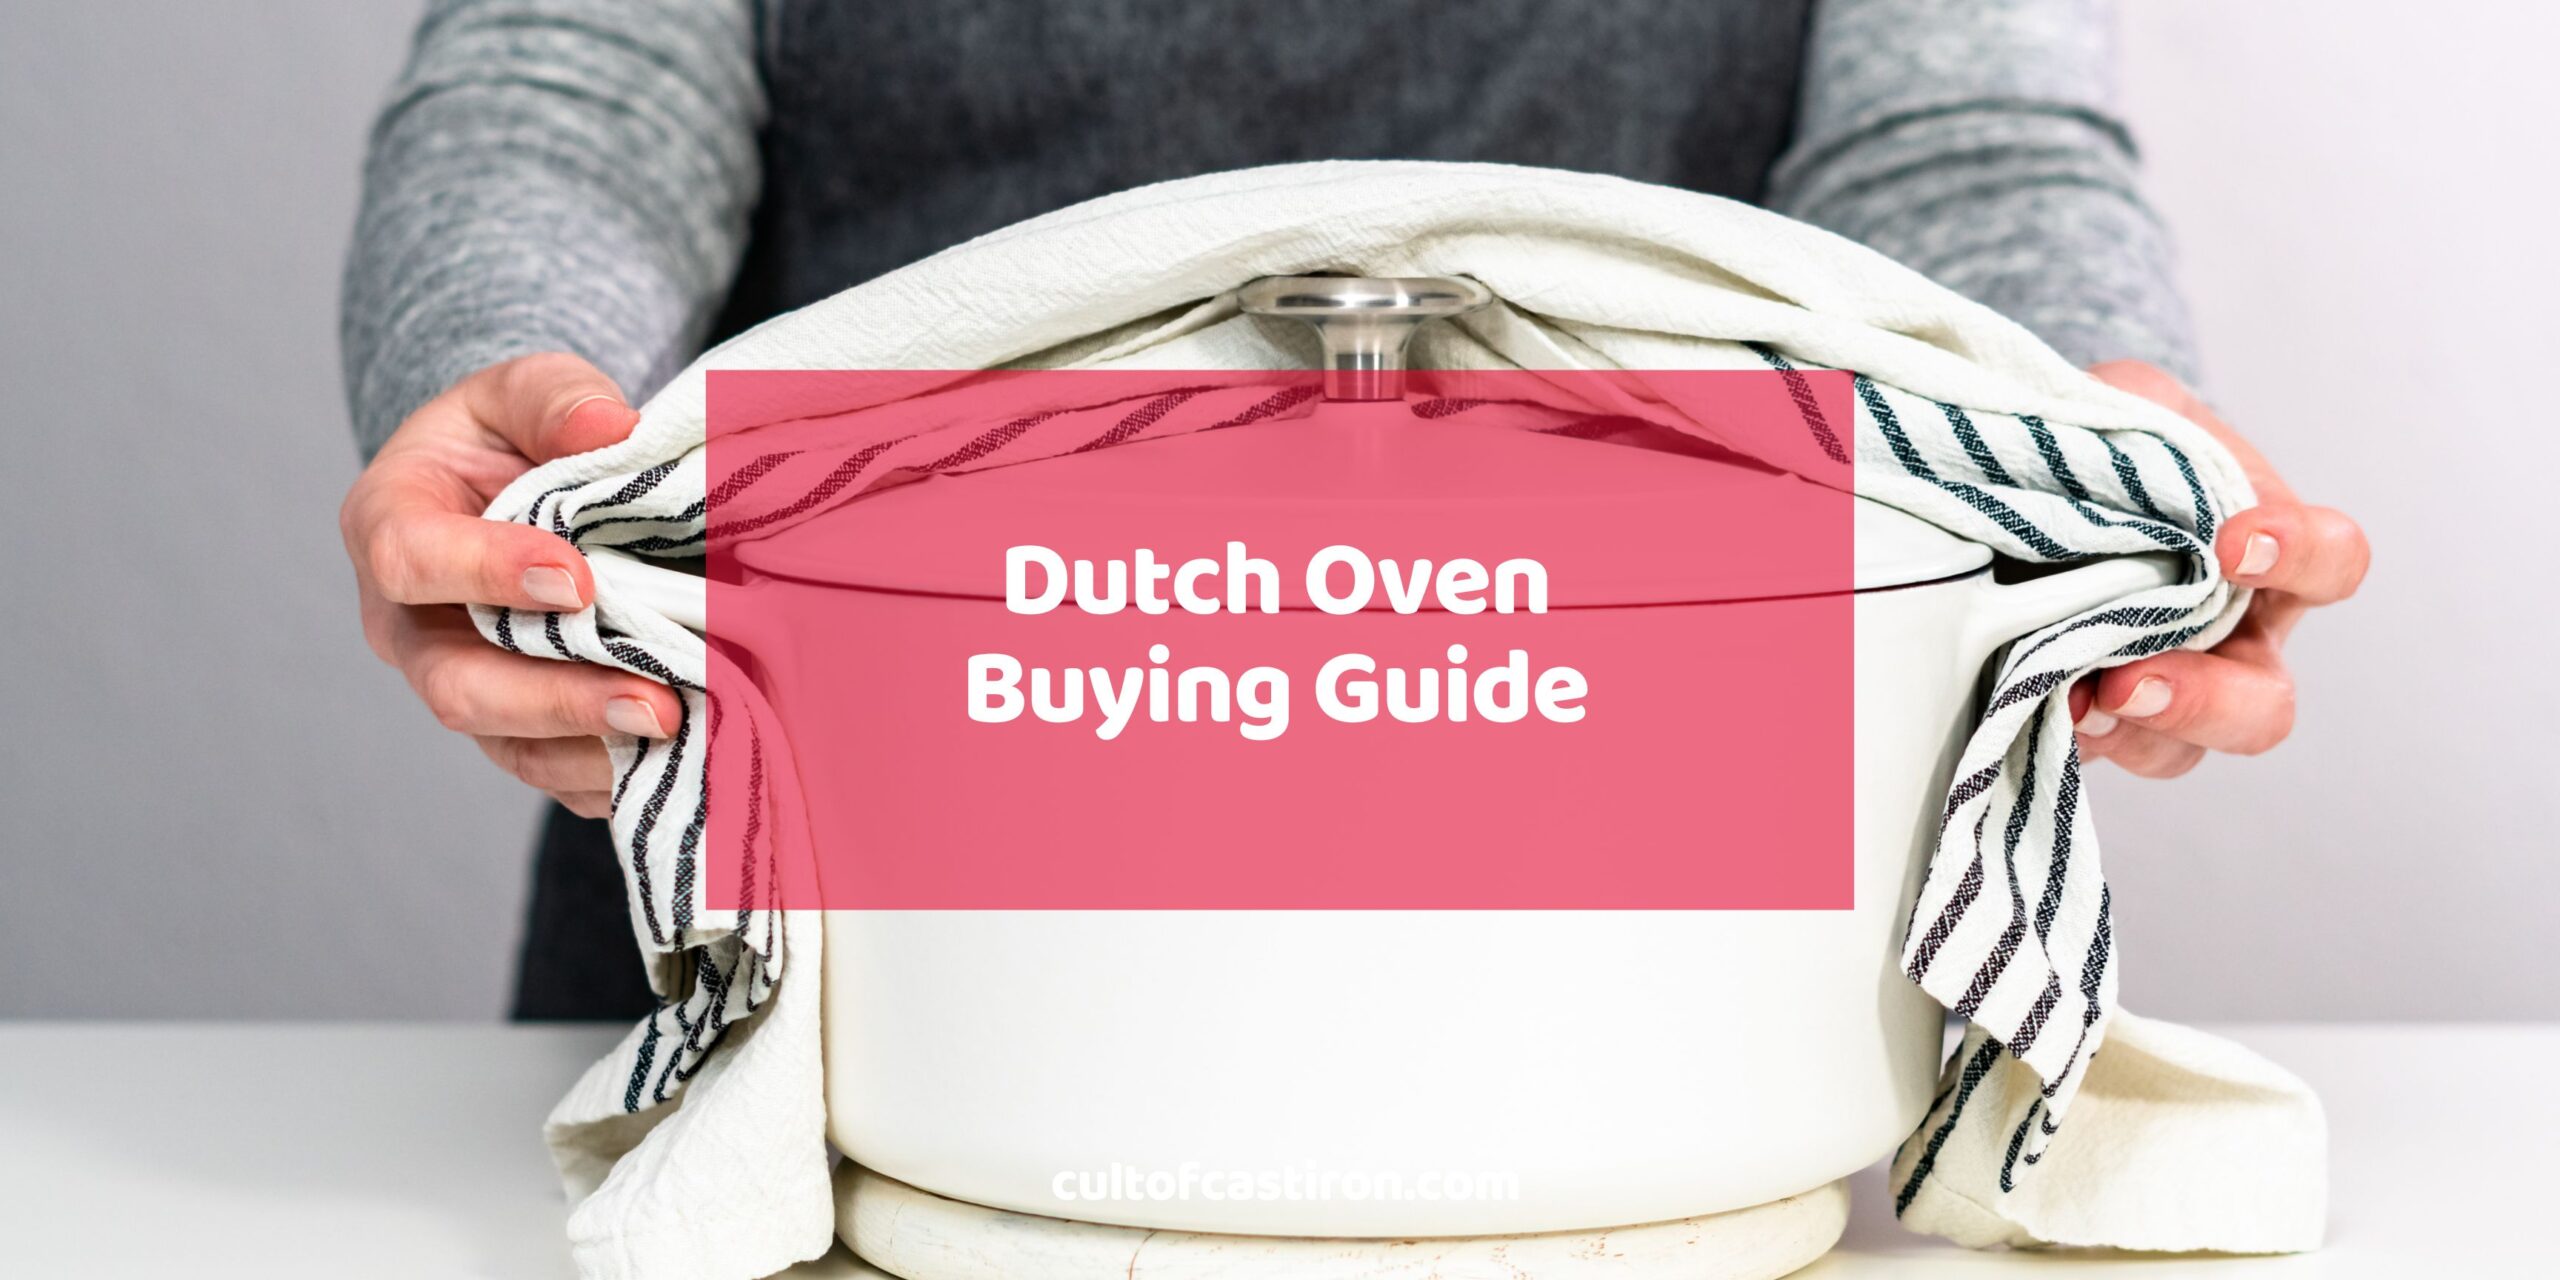 Dutch Oven Buying Guide